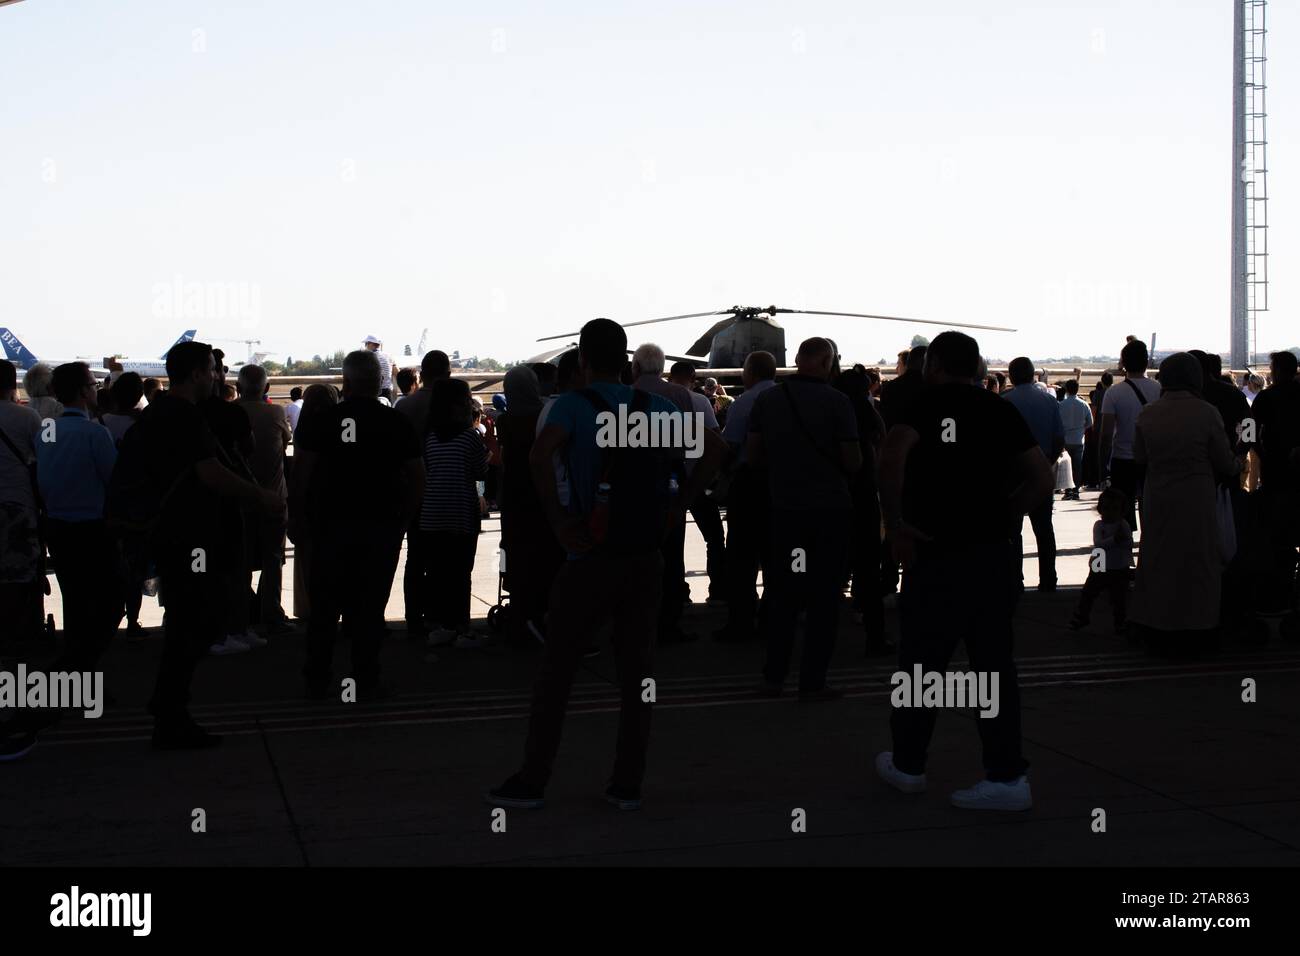 Crowd of people silhouette. A lot of walking people Stock Photo